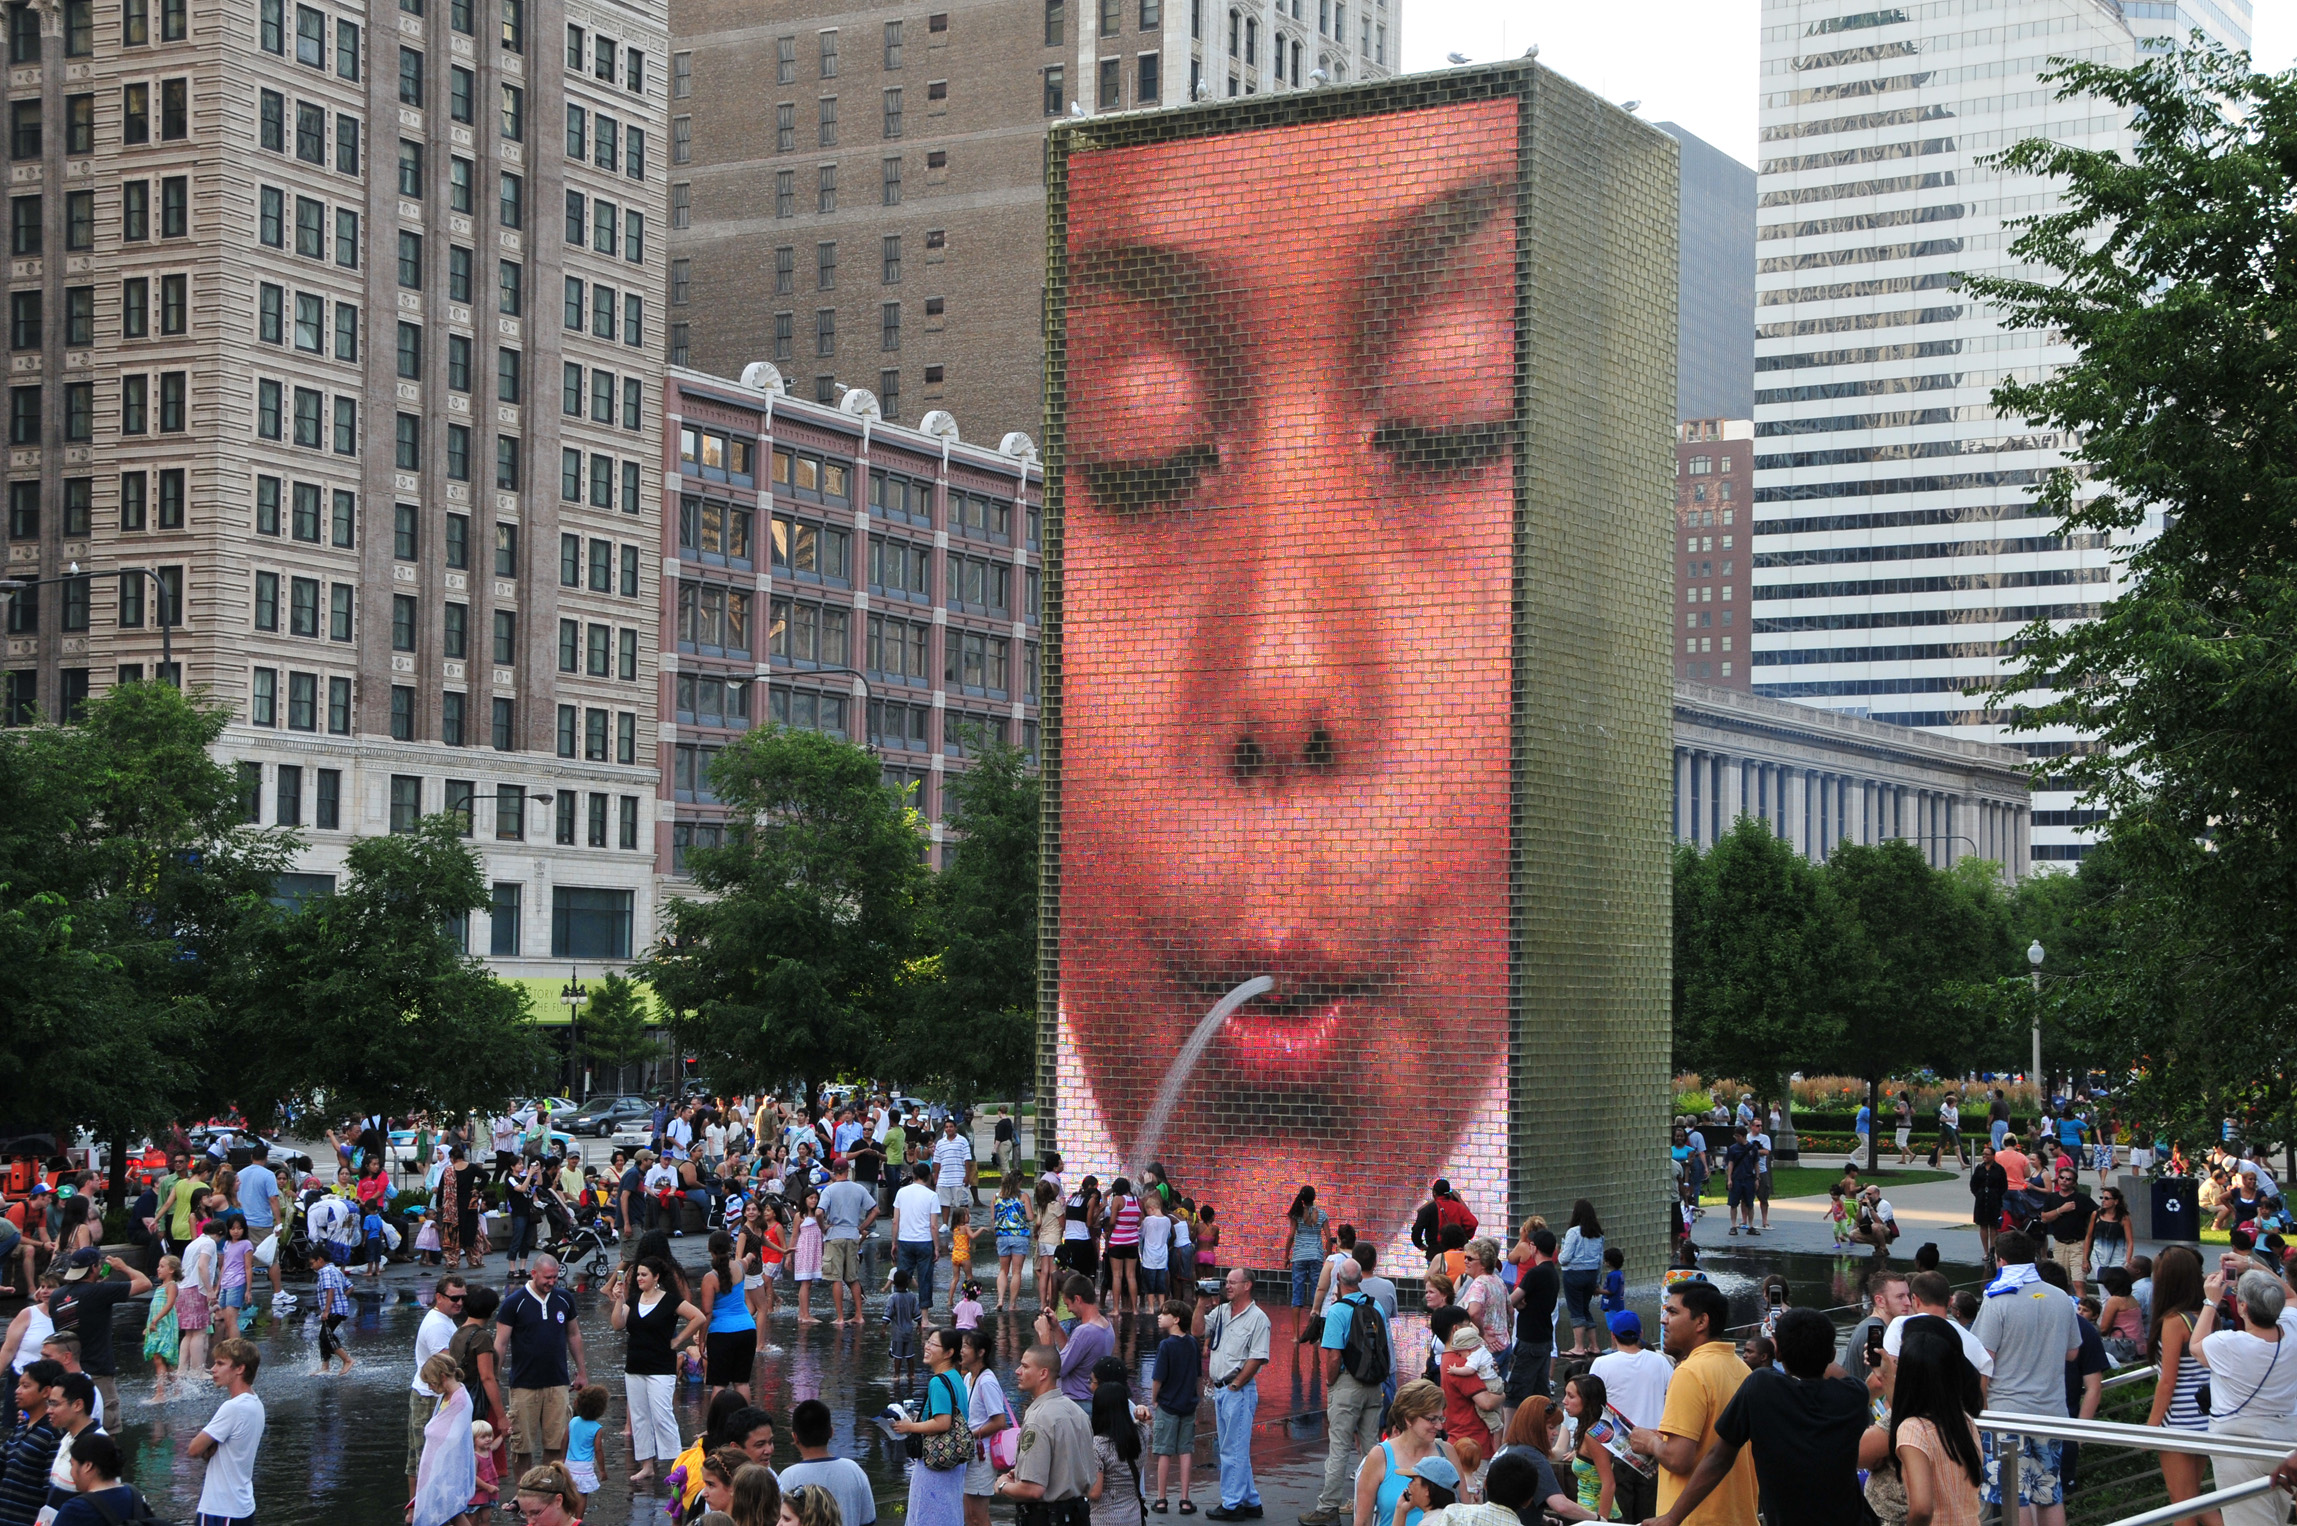 A crowd gathers around Crown Fountain in Chicago's Millenium Park, where a fountain appears to "spit" water on visitors.